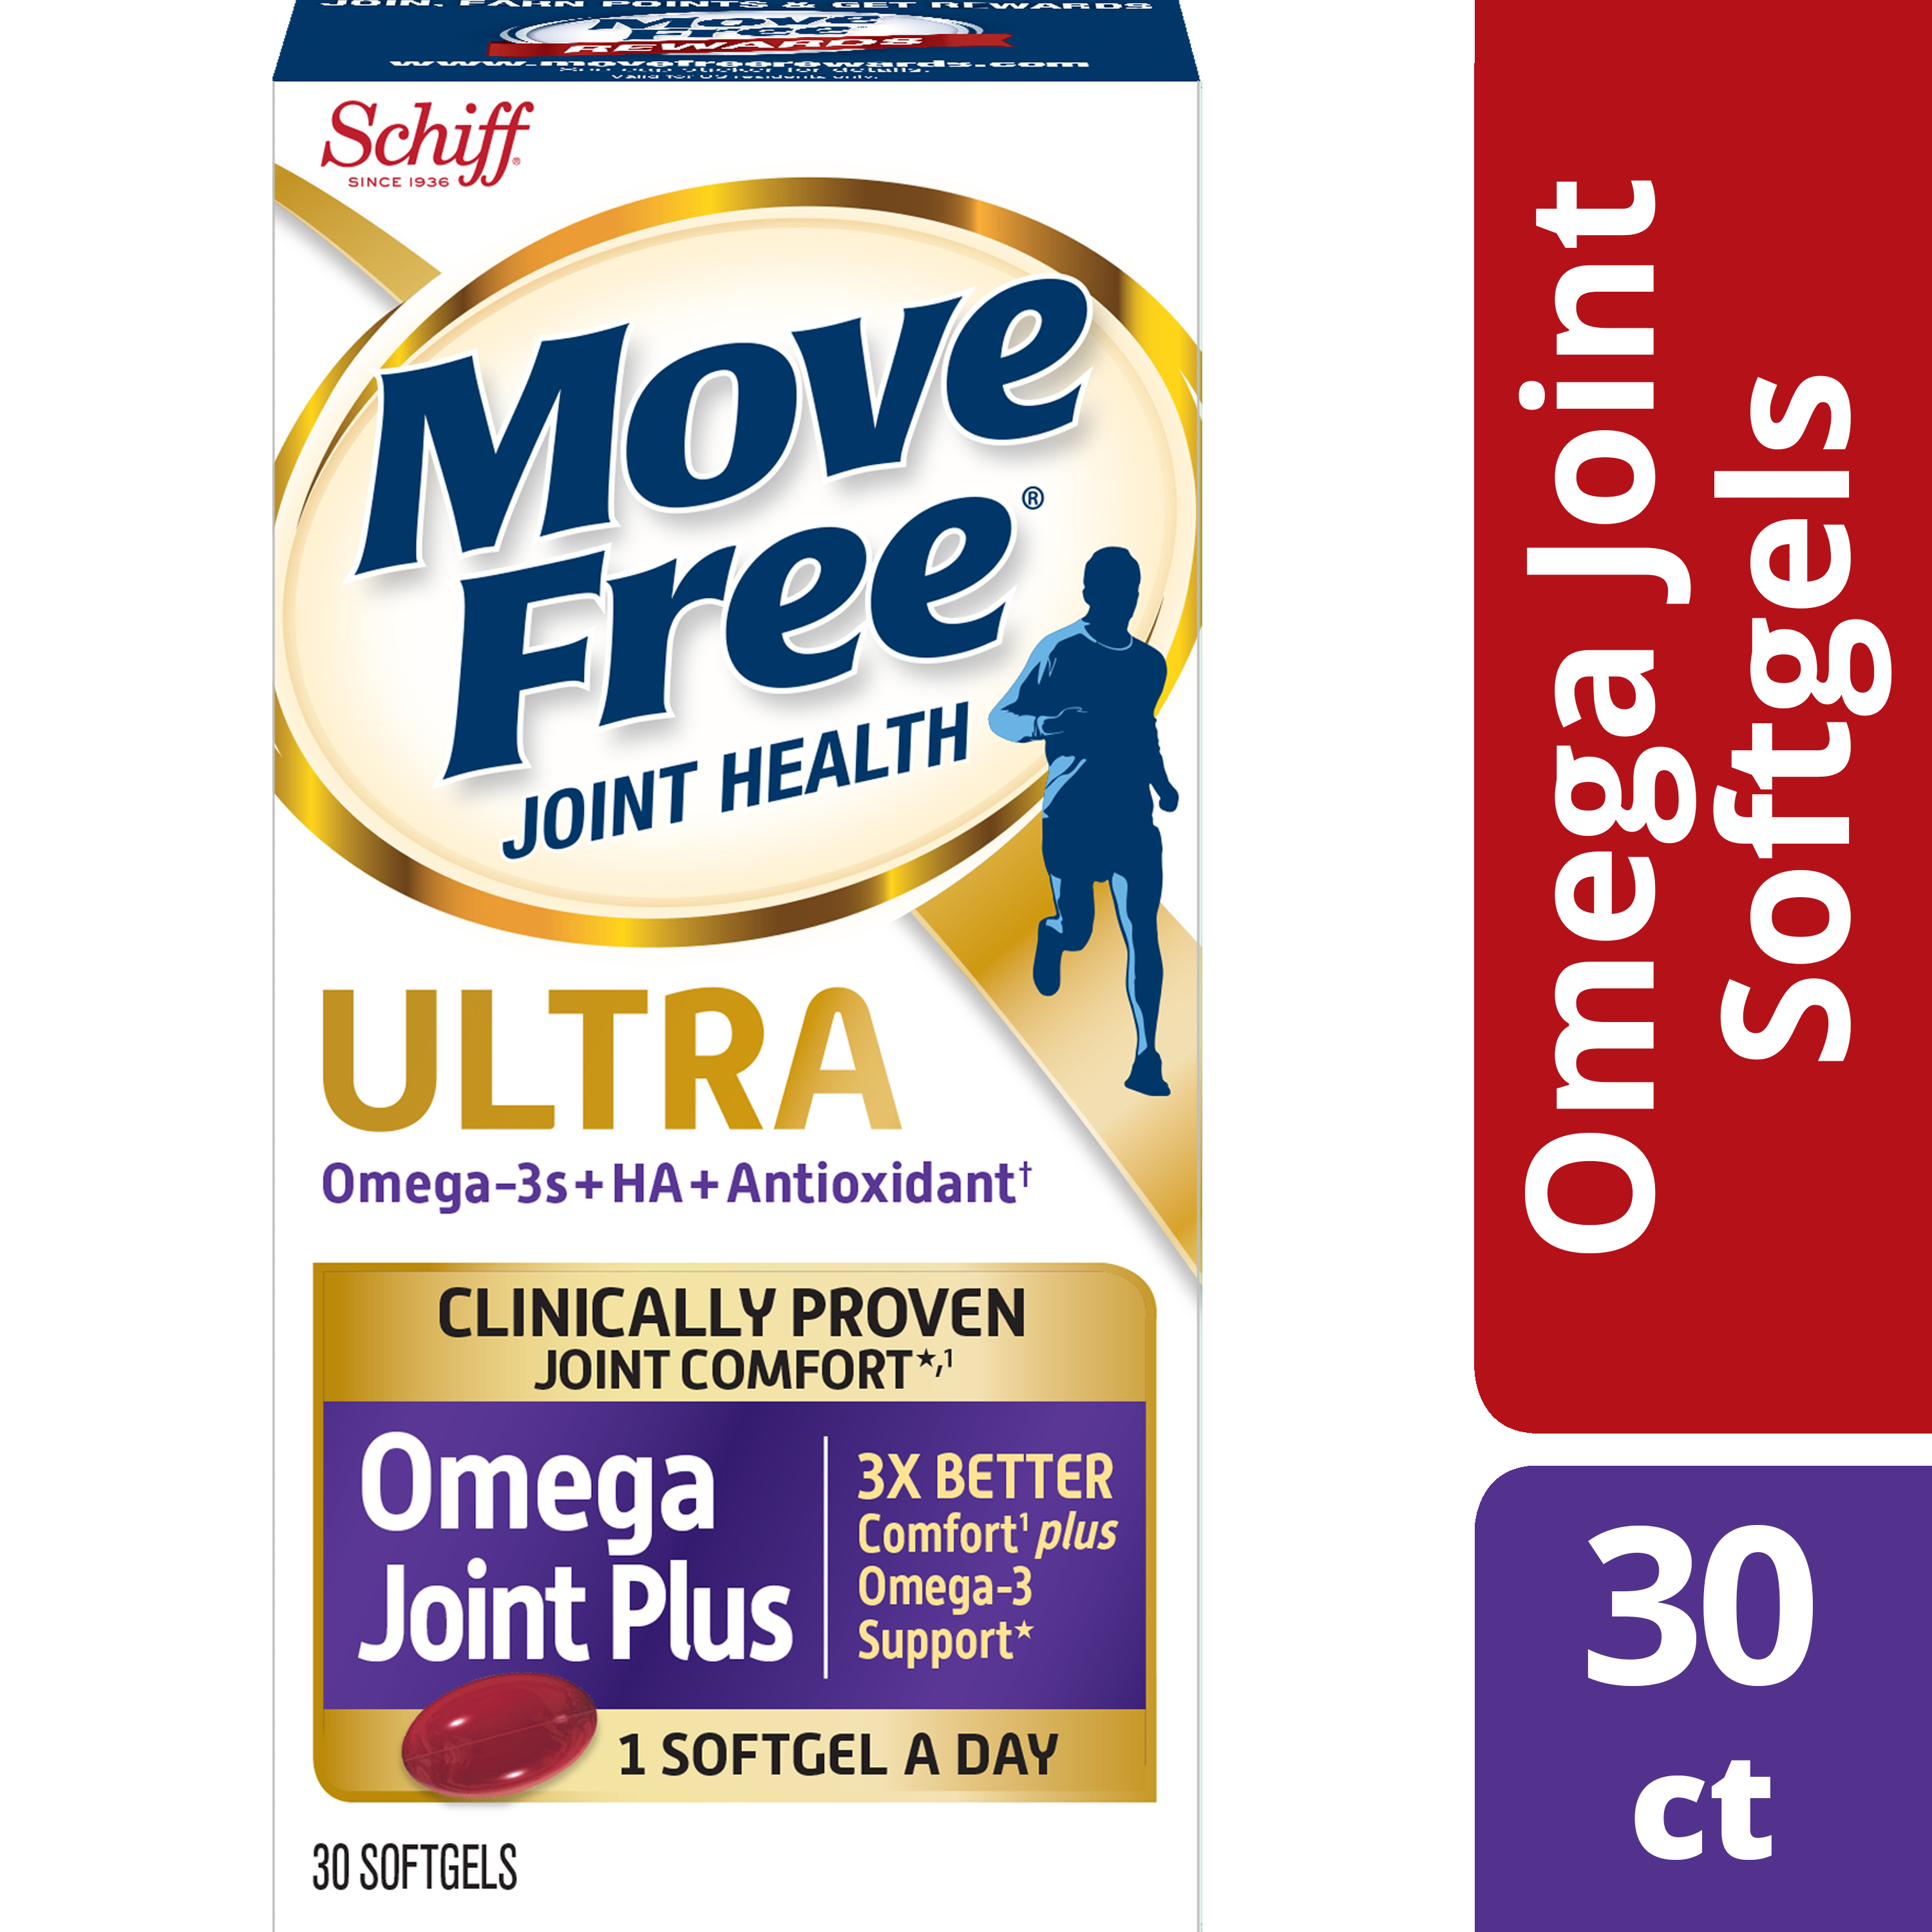 Move Free Ultra Omega, 30 softgels - Joint Health Supplement with Omega-3 Krill Oil and Hyaluronic Acid - image 1 of 7